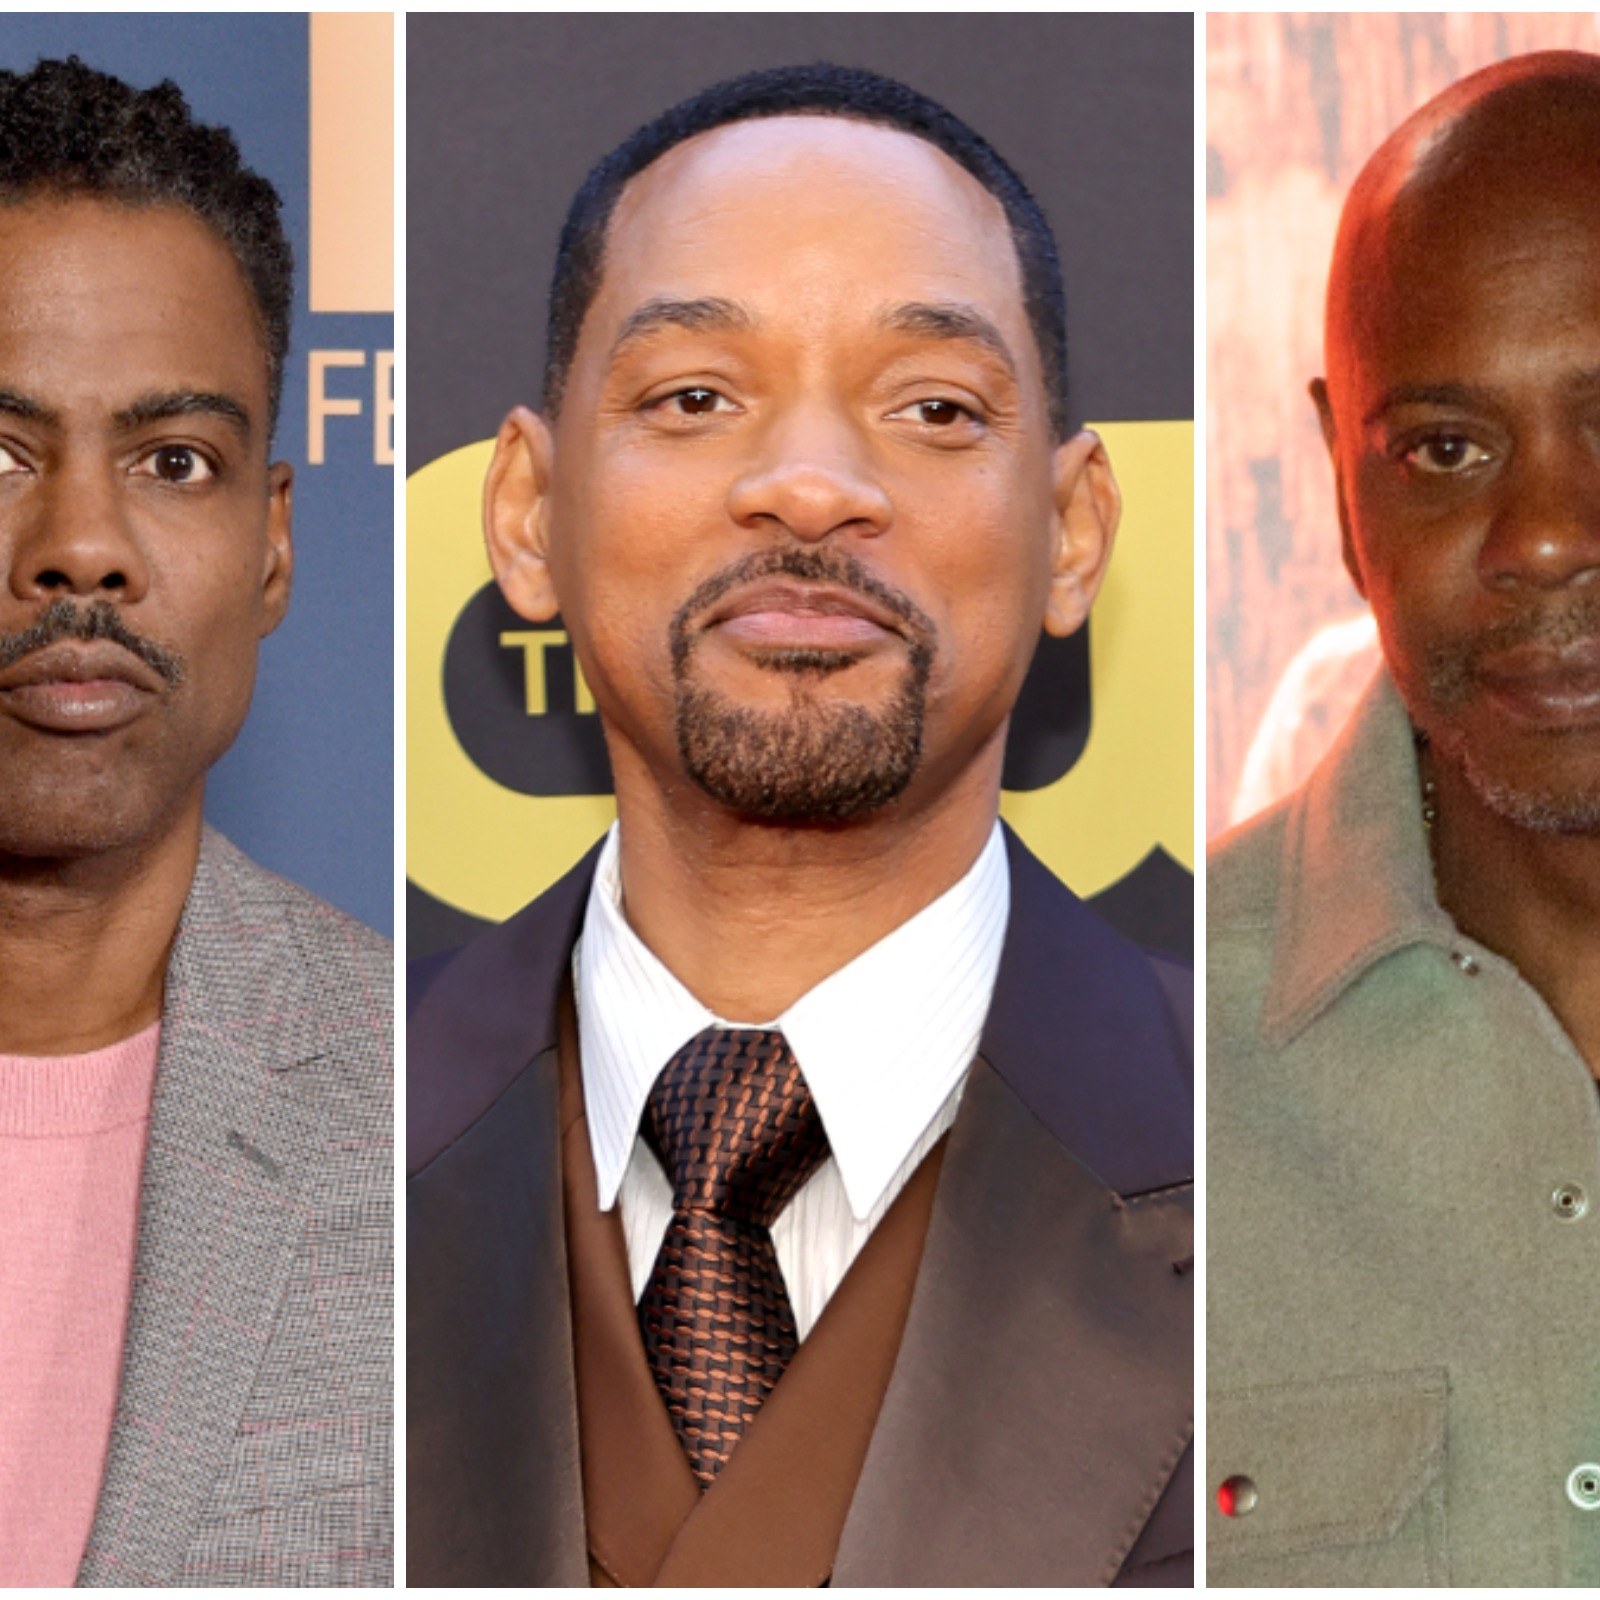 Chris Rock Cracks Will Smith Joke Onstage After Dave Chappelle 'Attack'